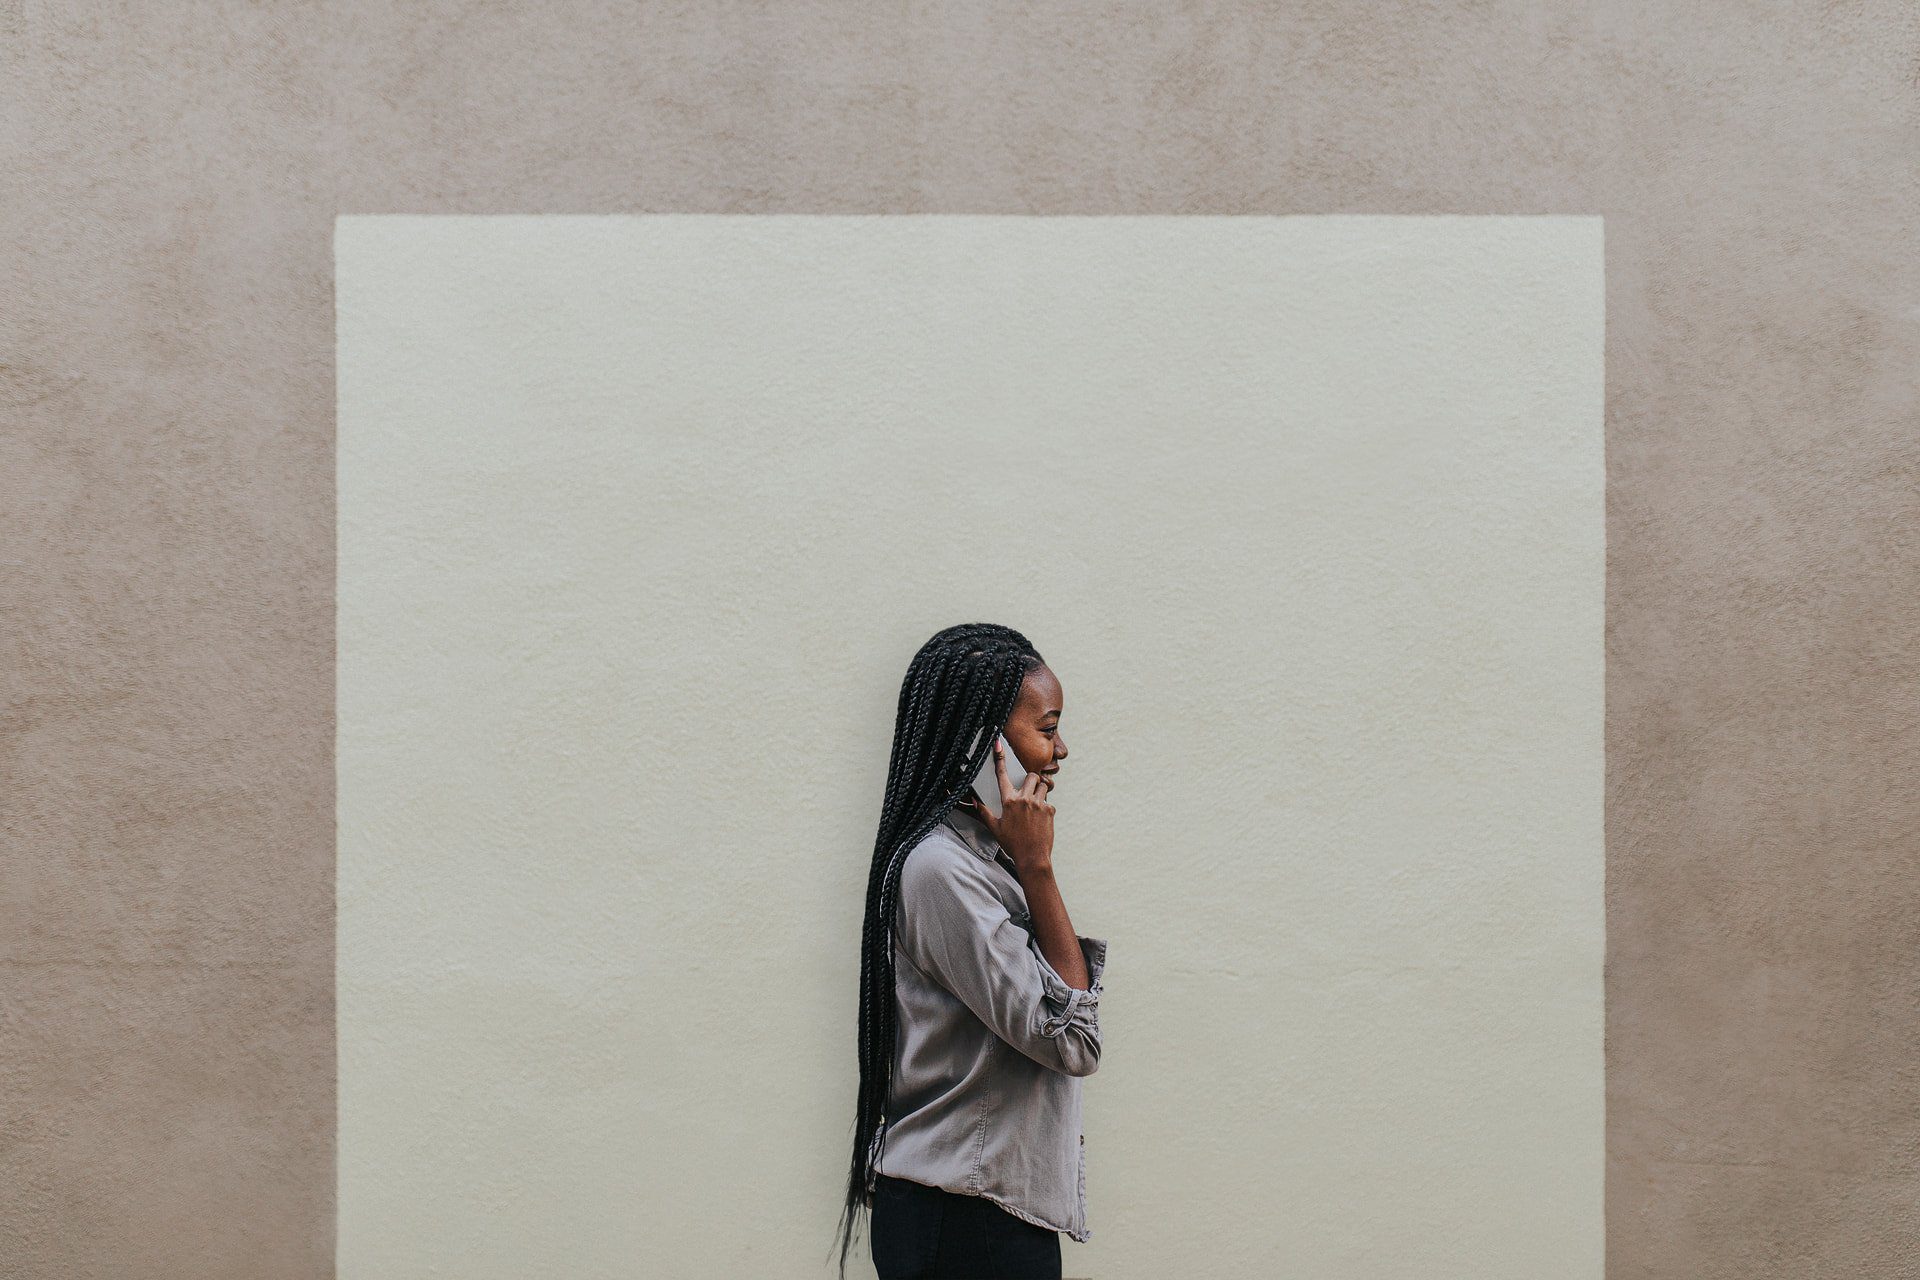 black woman on the phone against a white wall